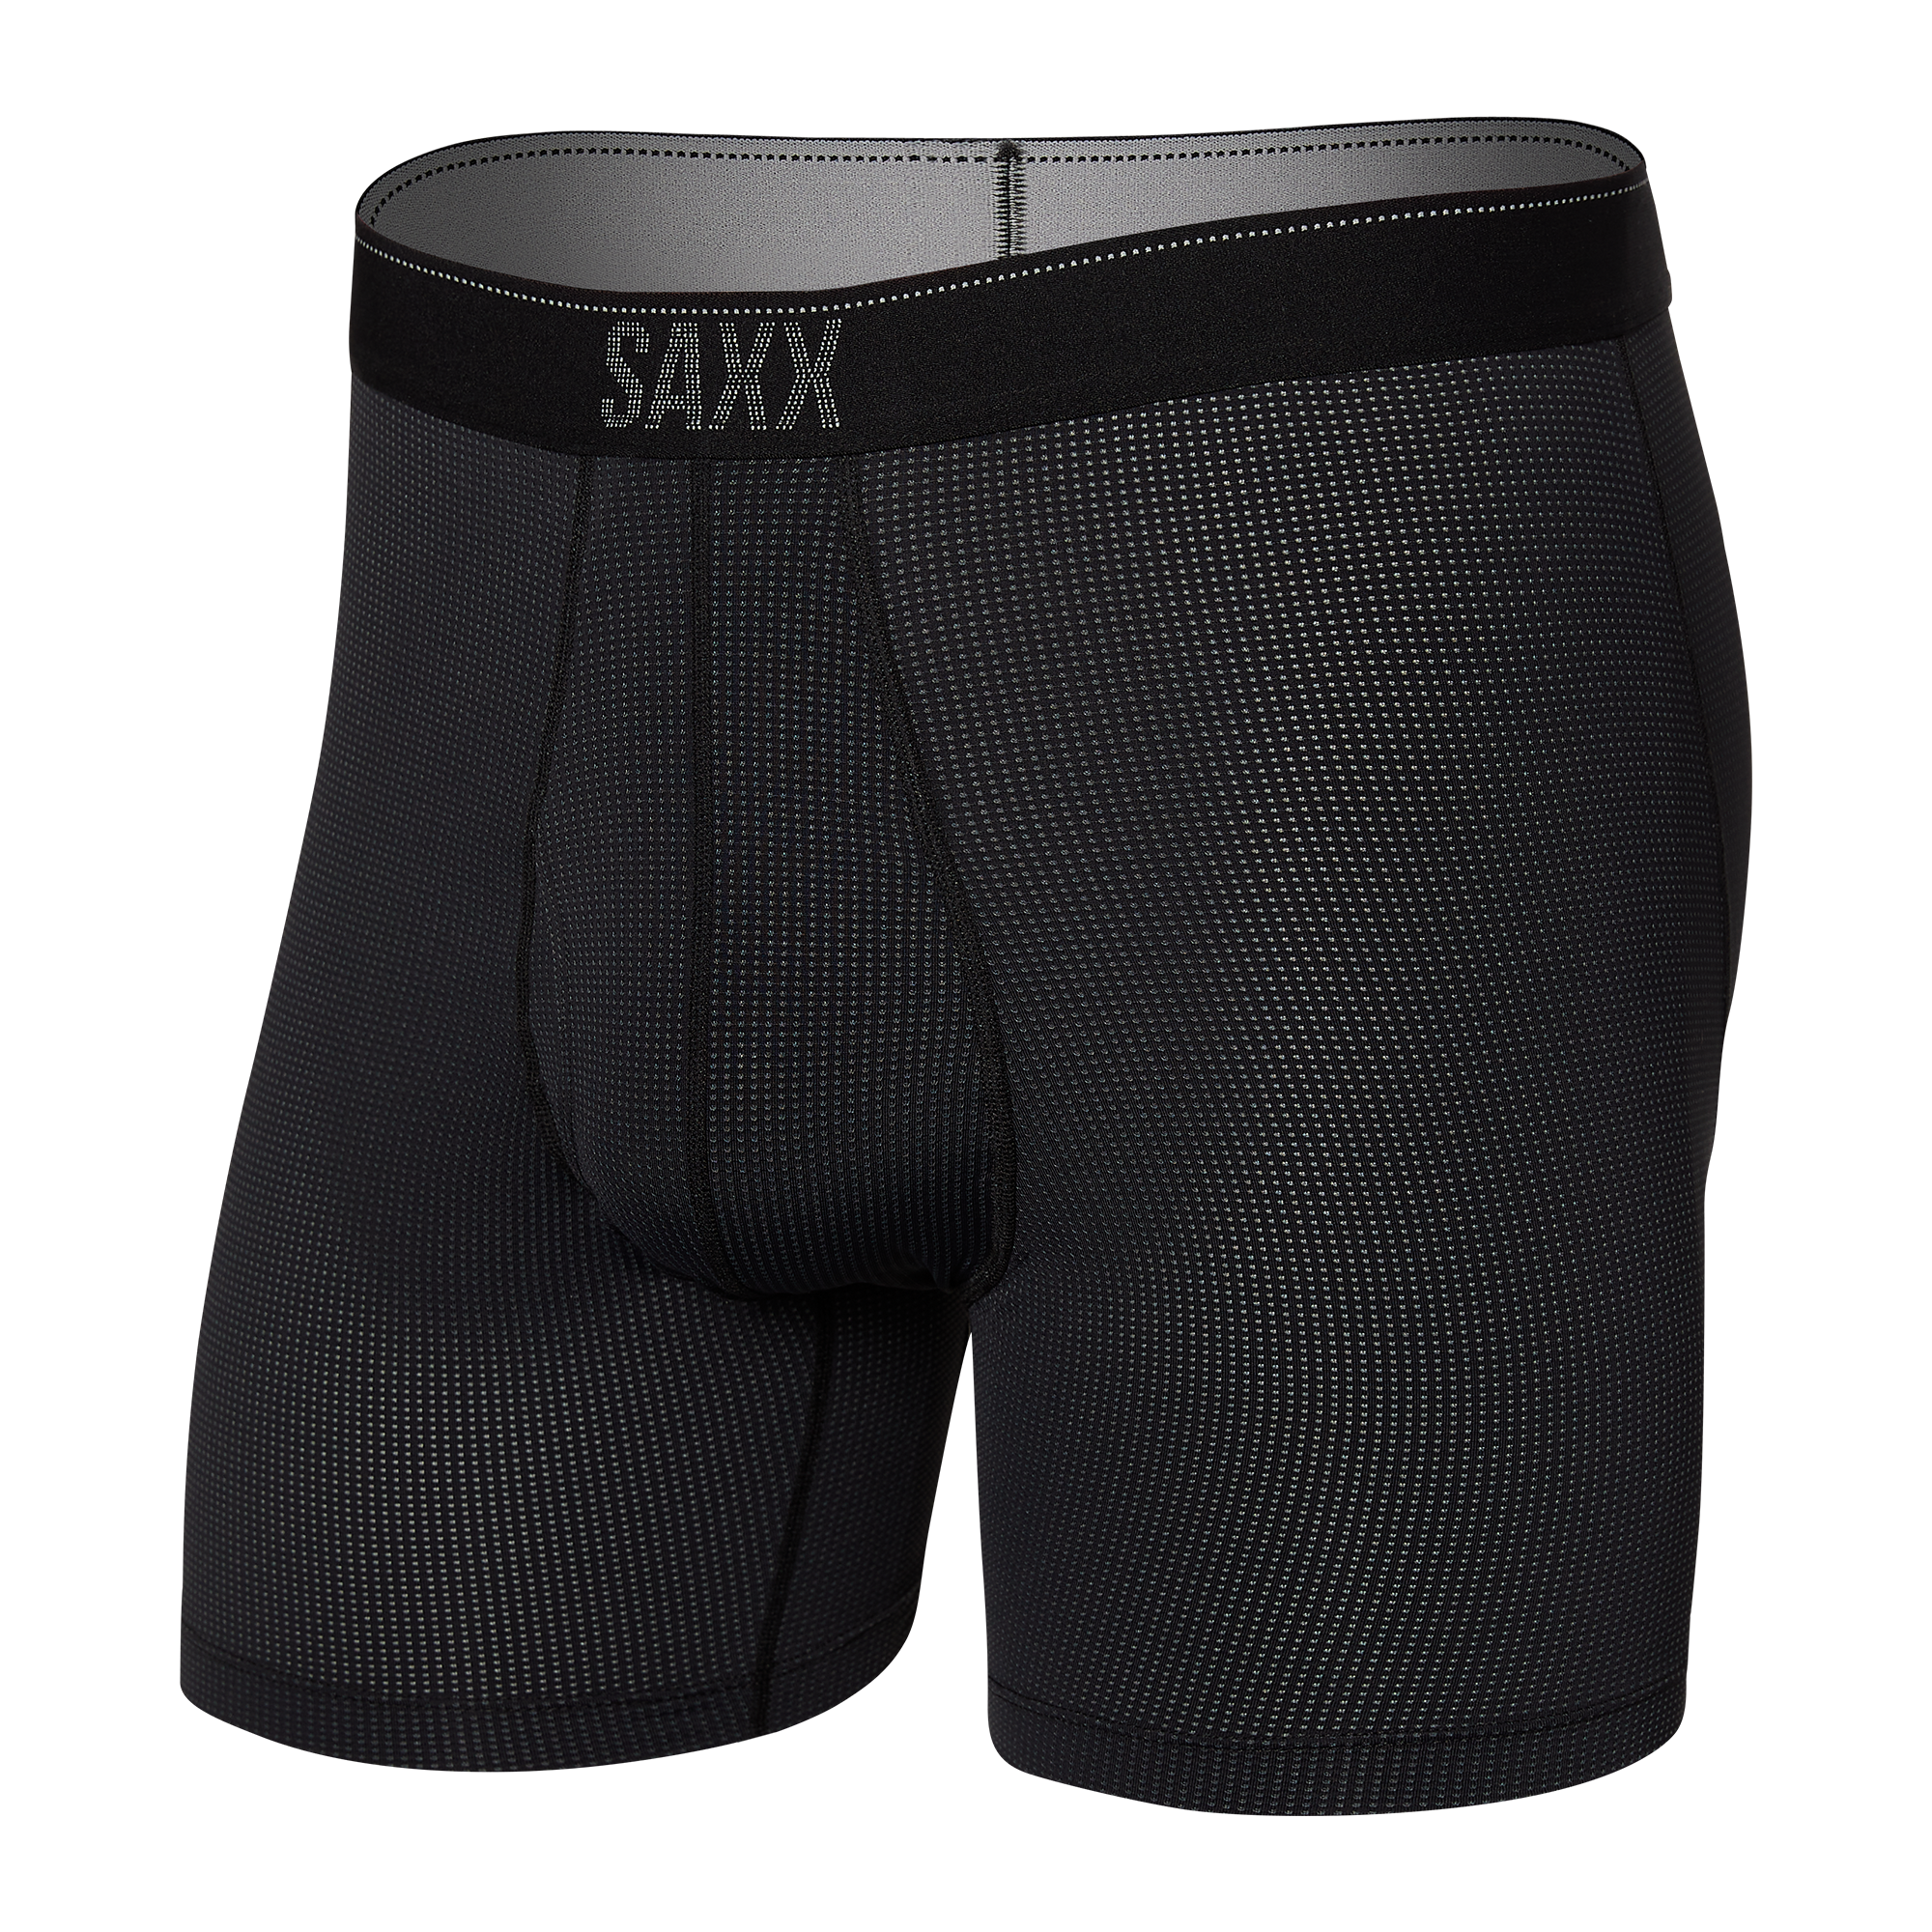 Saxx Sport Mesh 2 Pack Boxer Briefs - Cherry/Black – Trunks and Boxers